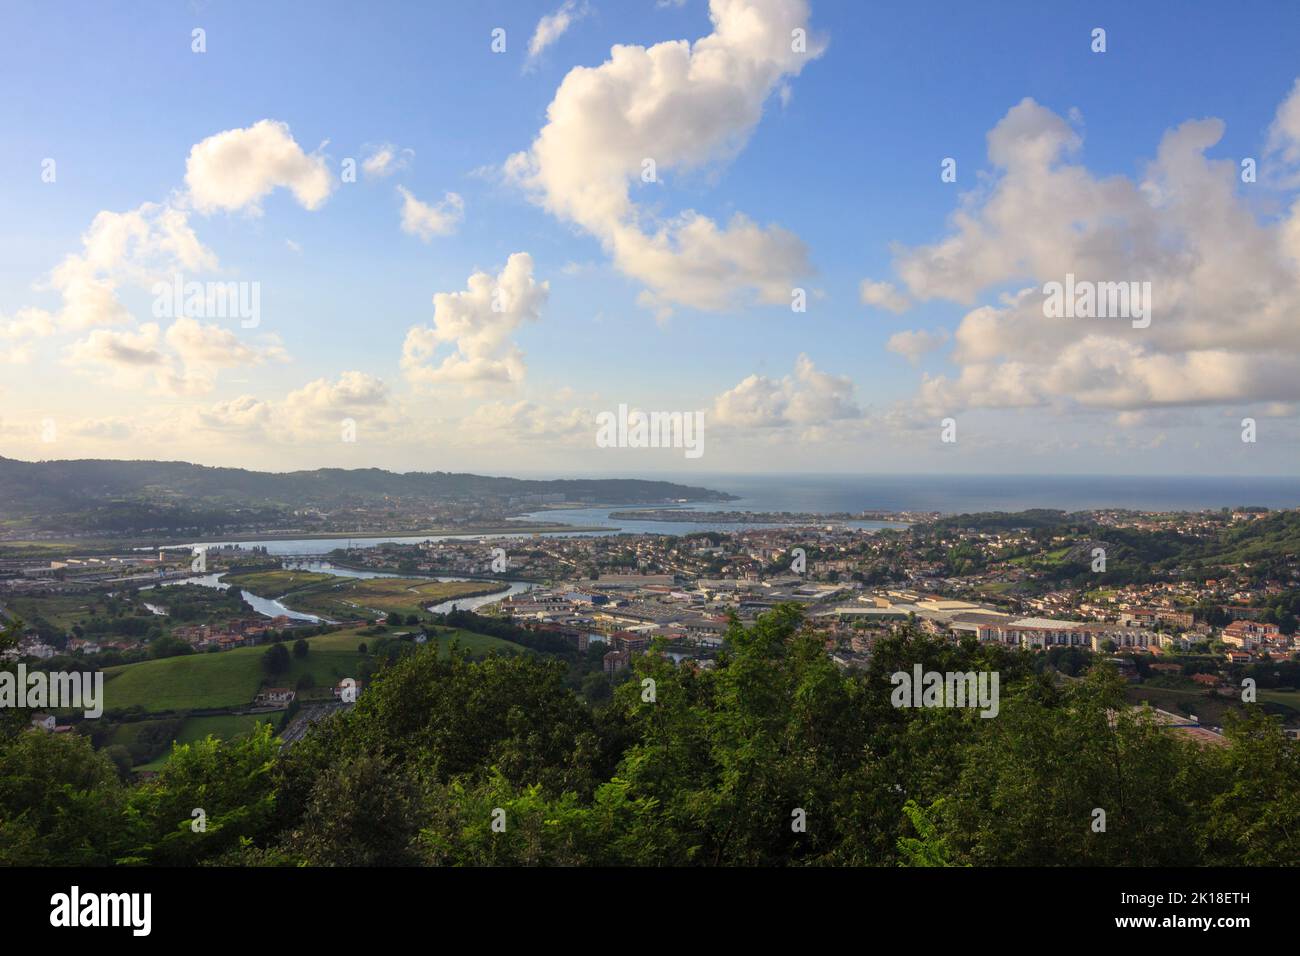 Irun, Basque Country, Spain : Overview of the bay of Txingudi betwen Spain and France. Stock Photo